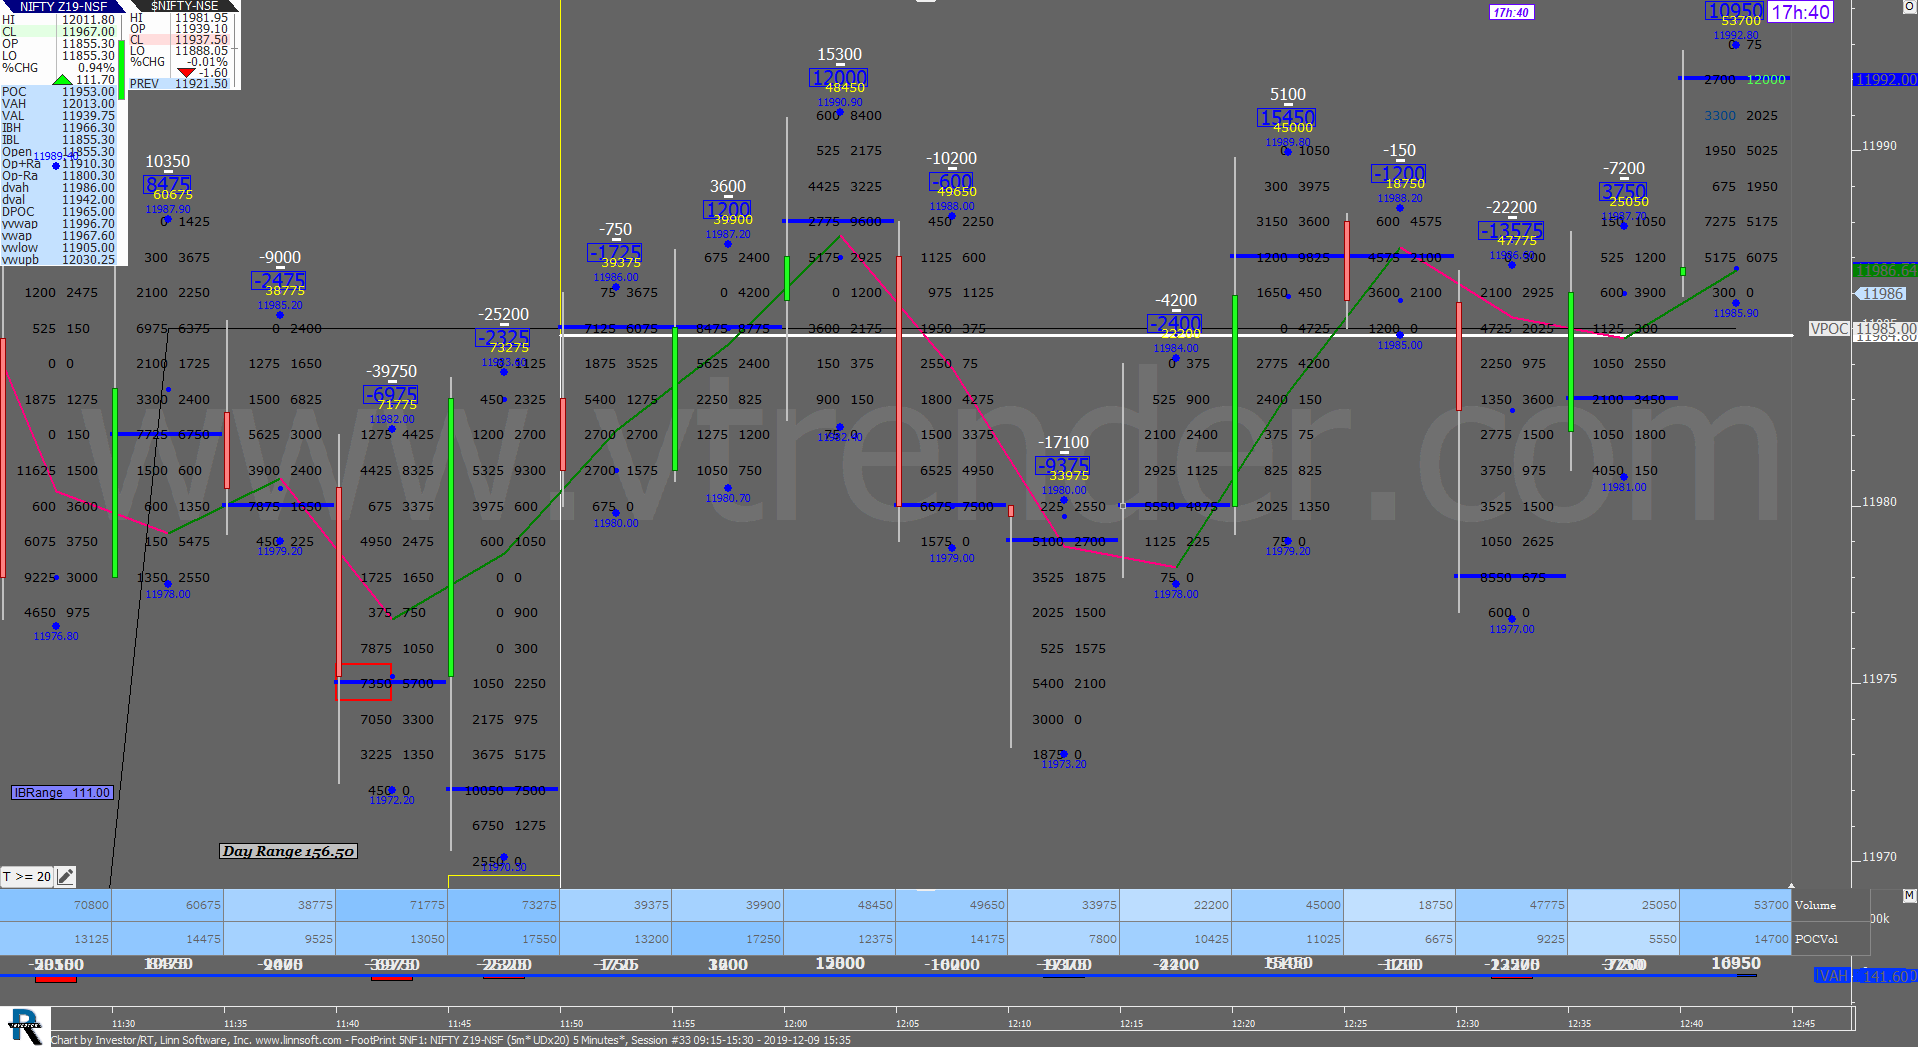 3 10 Order Flow Charts Dated 9Th Dec (5 Mins) Banknifty Futures, Day Trading, Intraday Trading, Intraday Trading Strategies, Nifty Futures, Order Flow Analysis, Support And Resistance, Trading Strategies, Volume Profile Trading